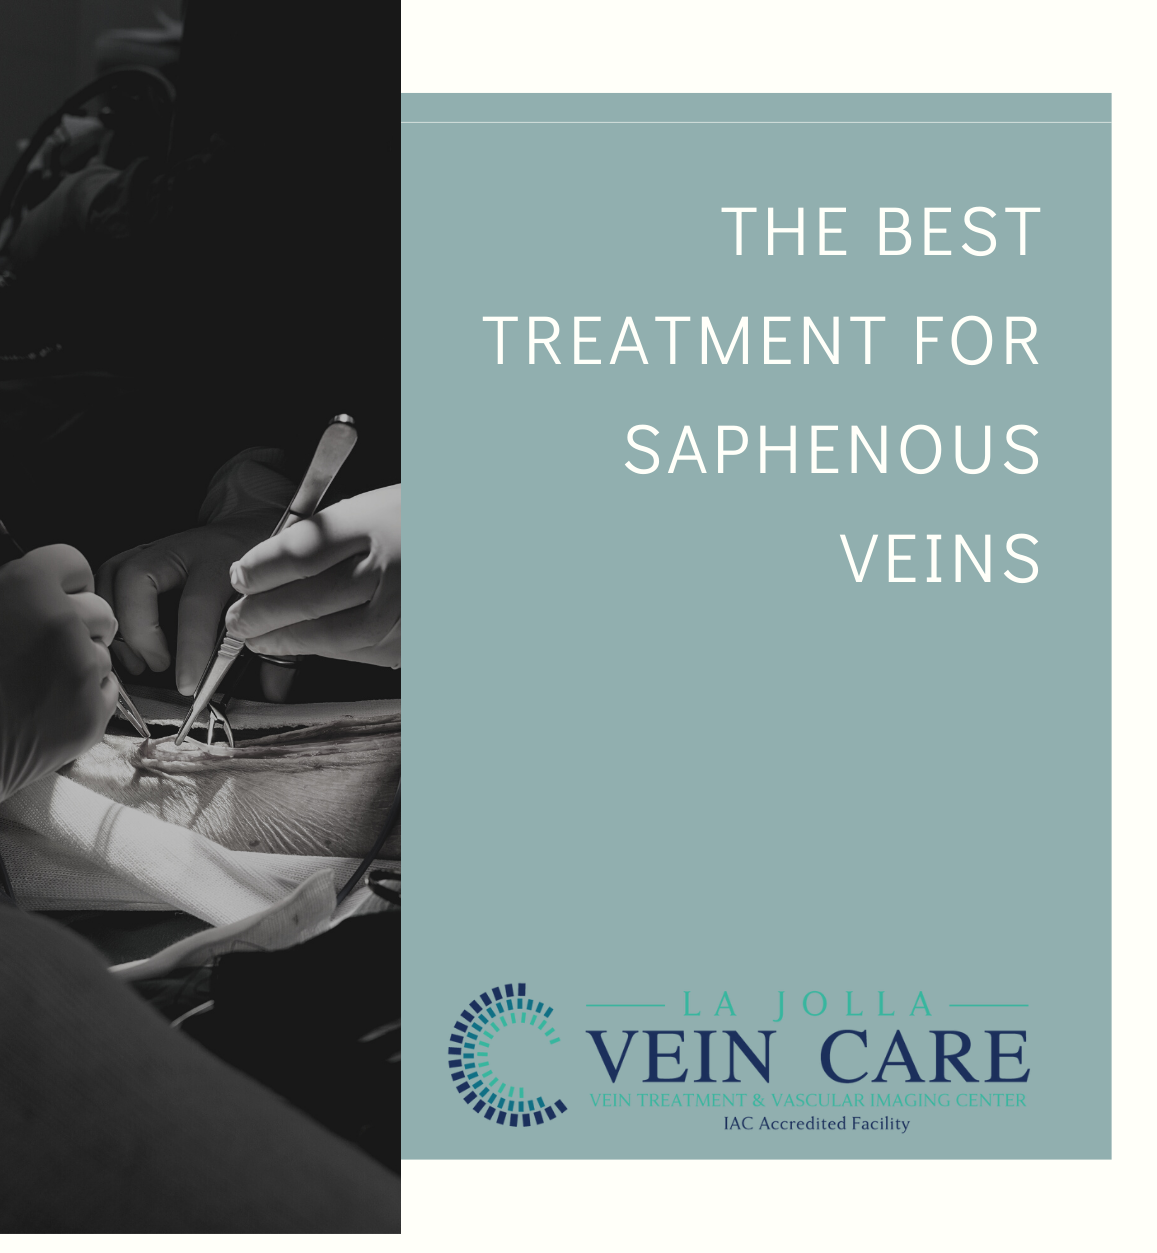 The best treatment for saphenous veins